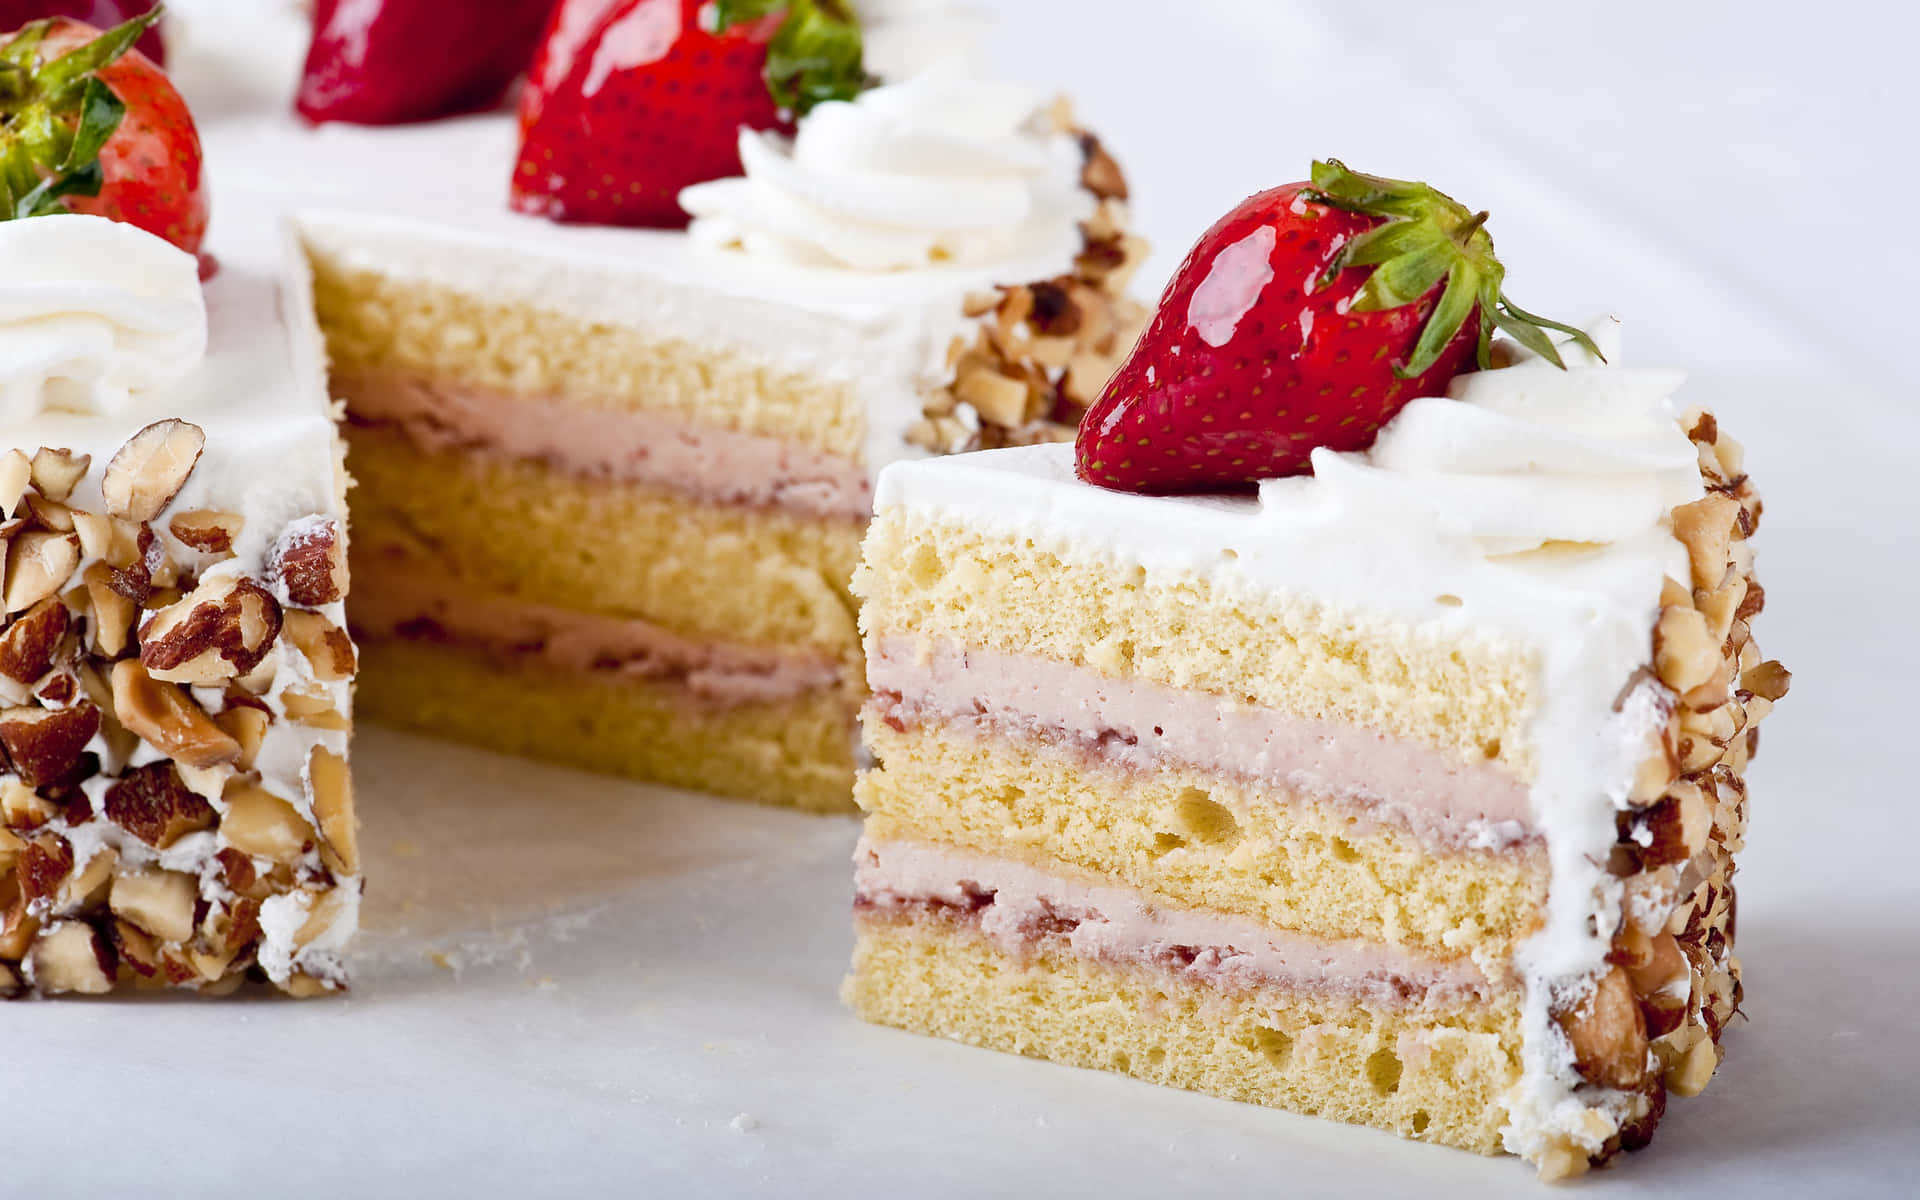 A Slice Of Cake With Strawberries And Almonds